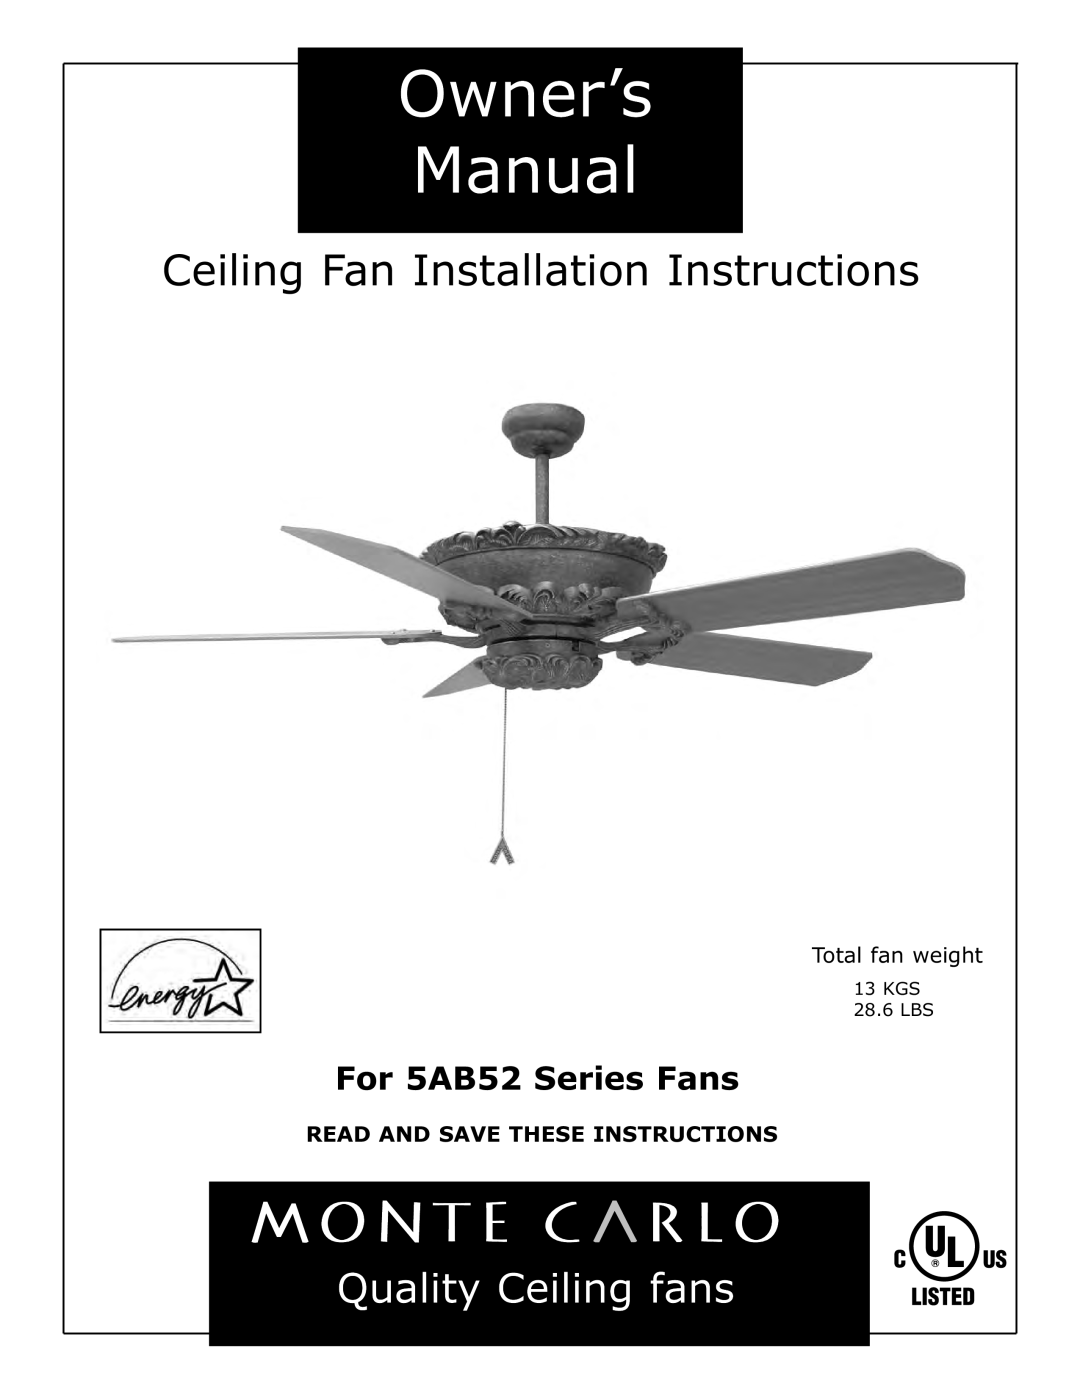 Monte Carlo Fan Company 5AB52 owner manual Read And Save These Instructions, Ceiling Fan Installation Instructions 